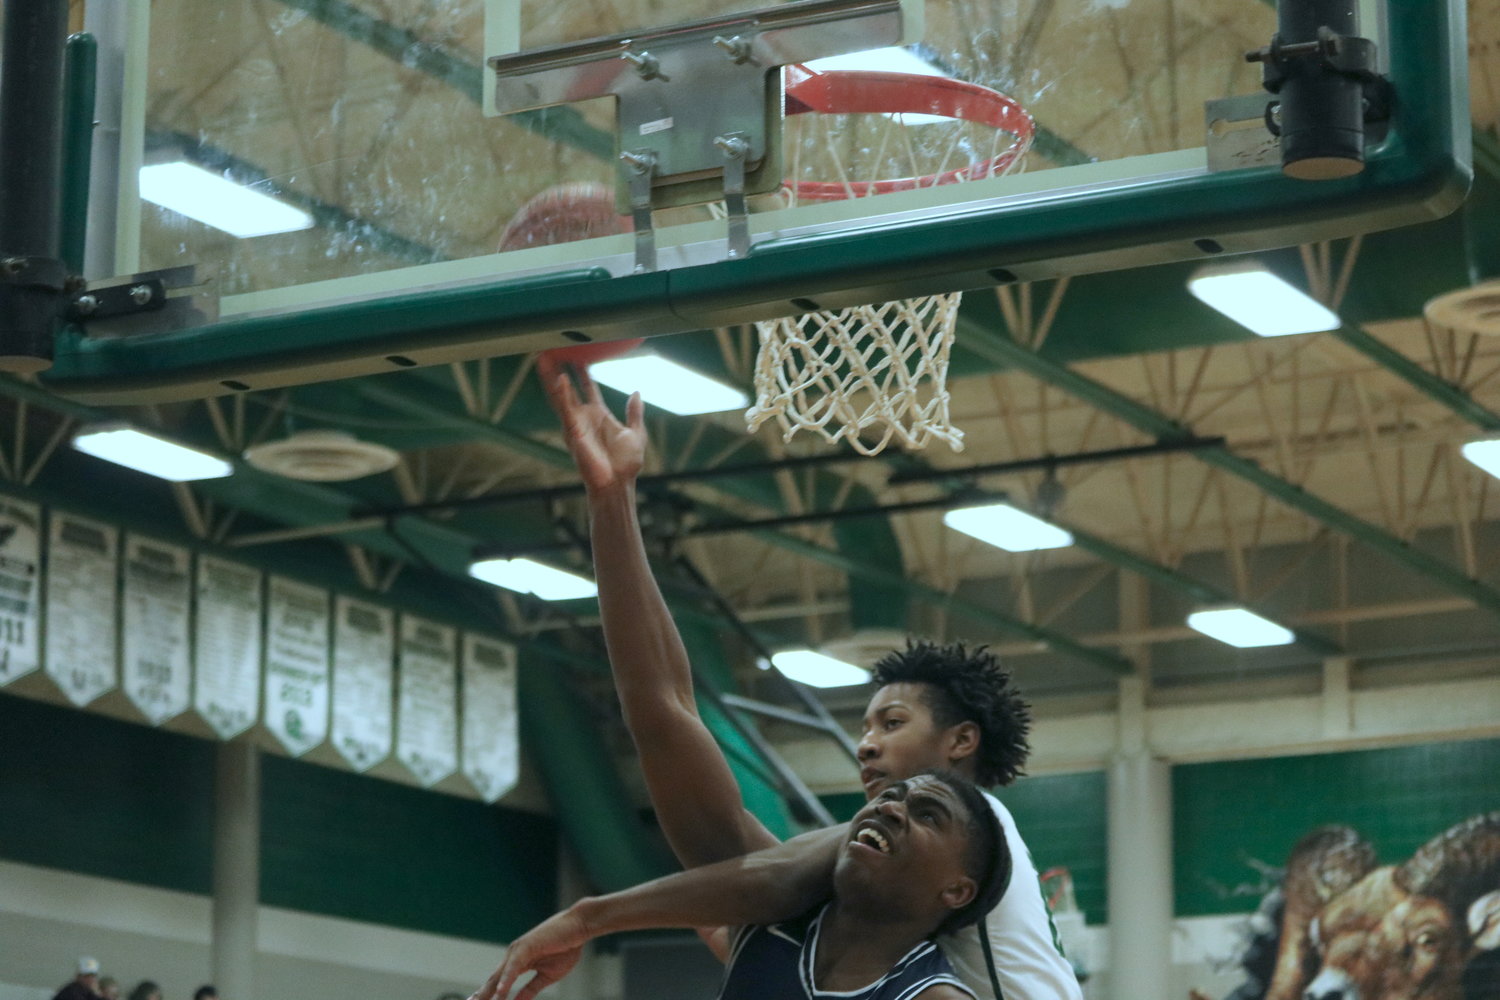 Jason Clark gets a layup and a foul during Wednesday’s game between Mayde Creek and Tompkins at the Mayde Creek gym.